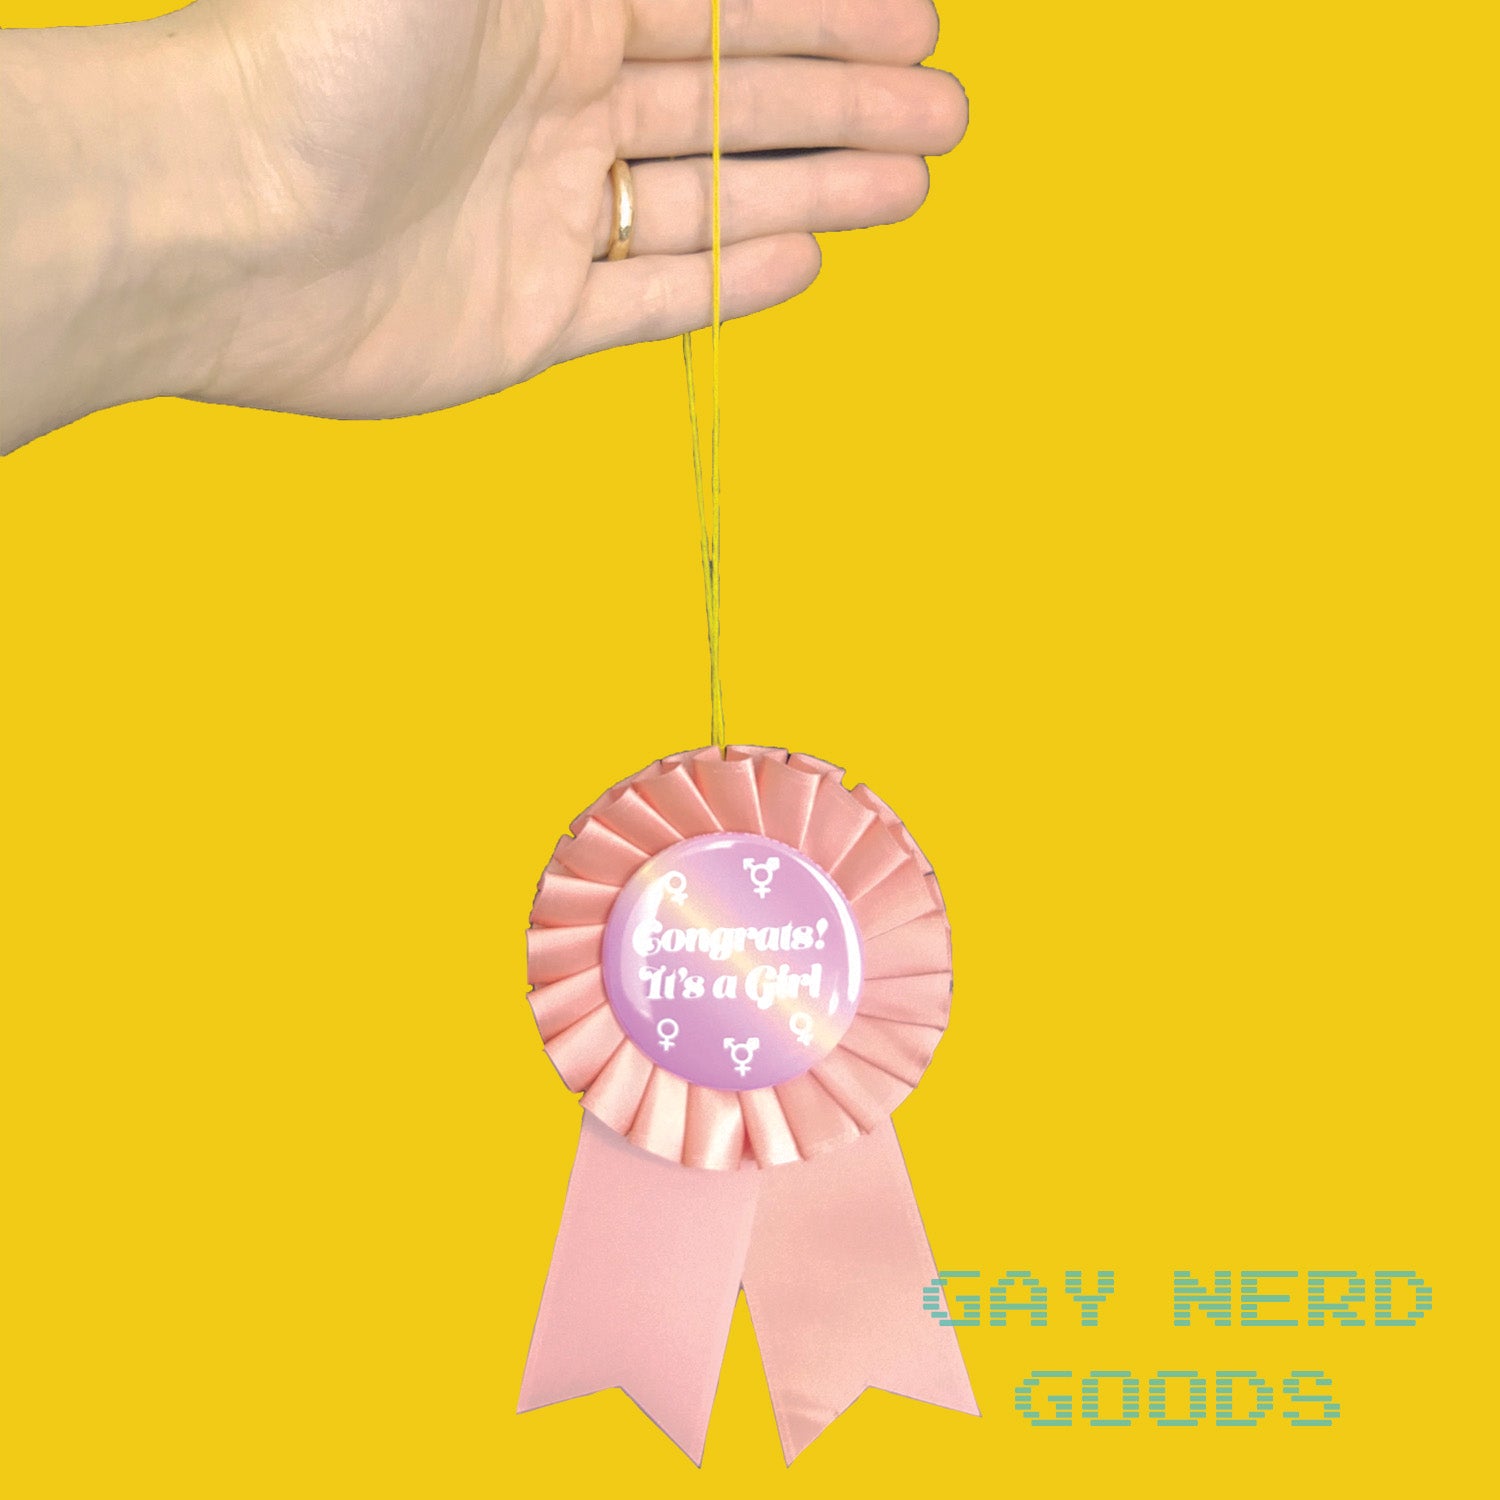 hand holding the thread loop of the "congrats it's a girl" award ribbon on a yellow background